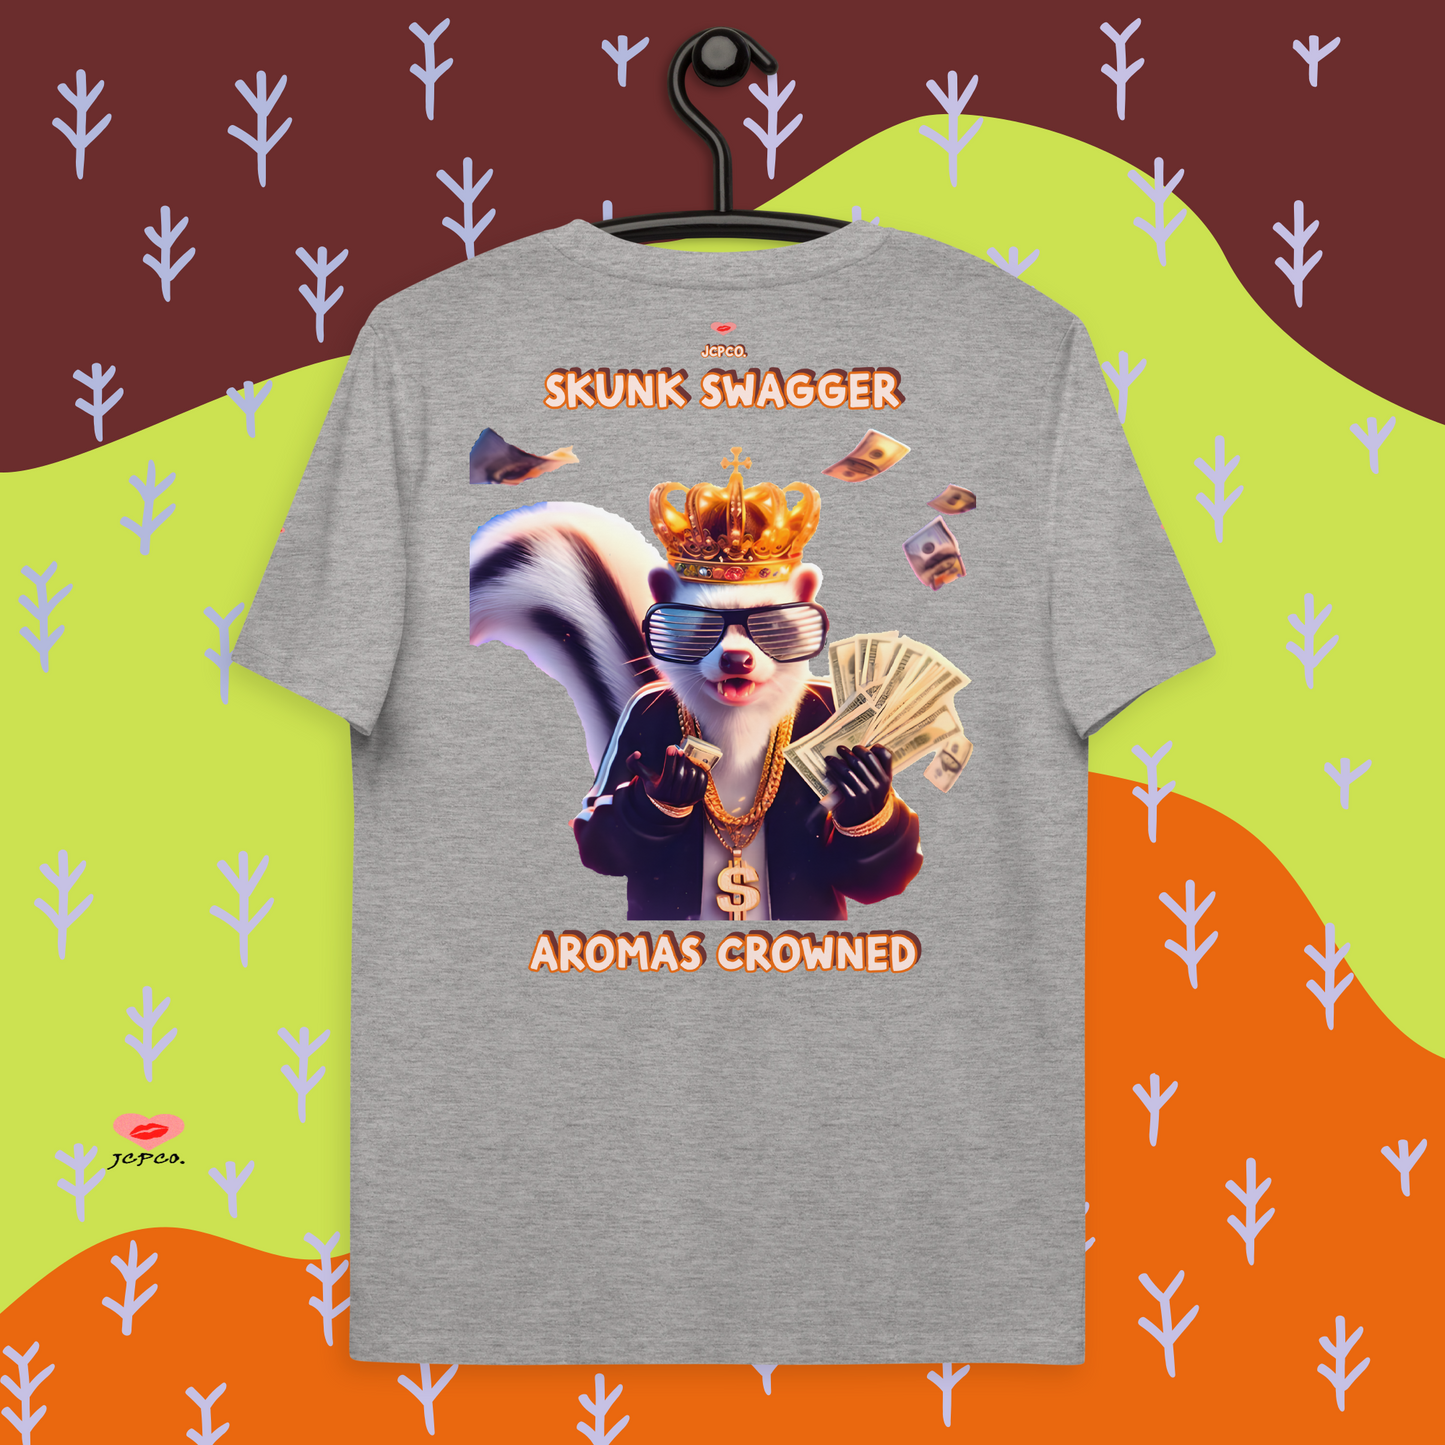 👑Skunk Swagger 🦨Skunk Royalty Can't Be Beat Aromas Crowned💎Unisex organic cotton t-shirt👕